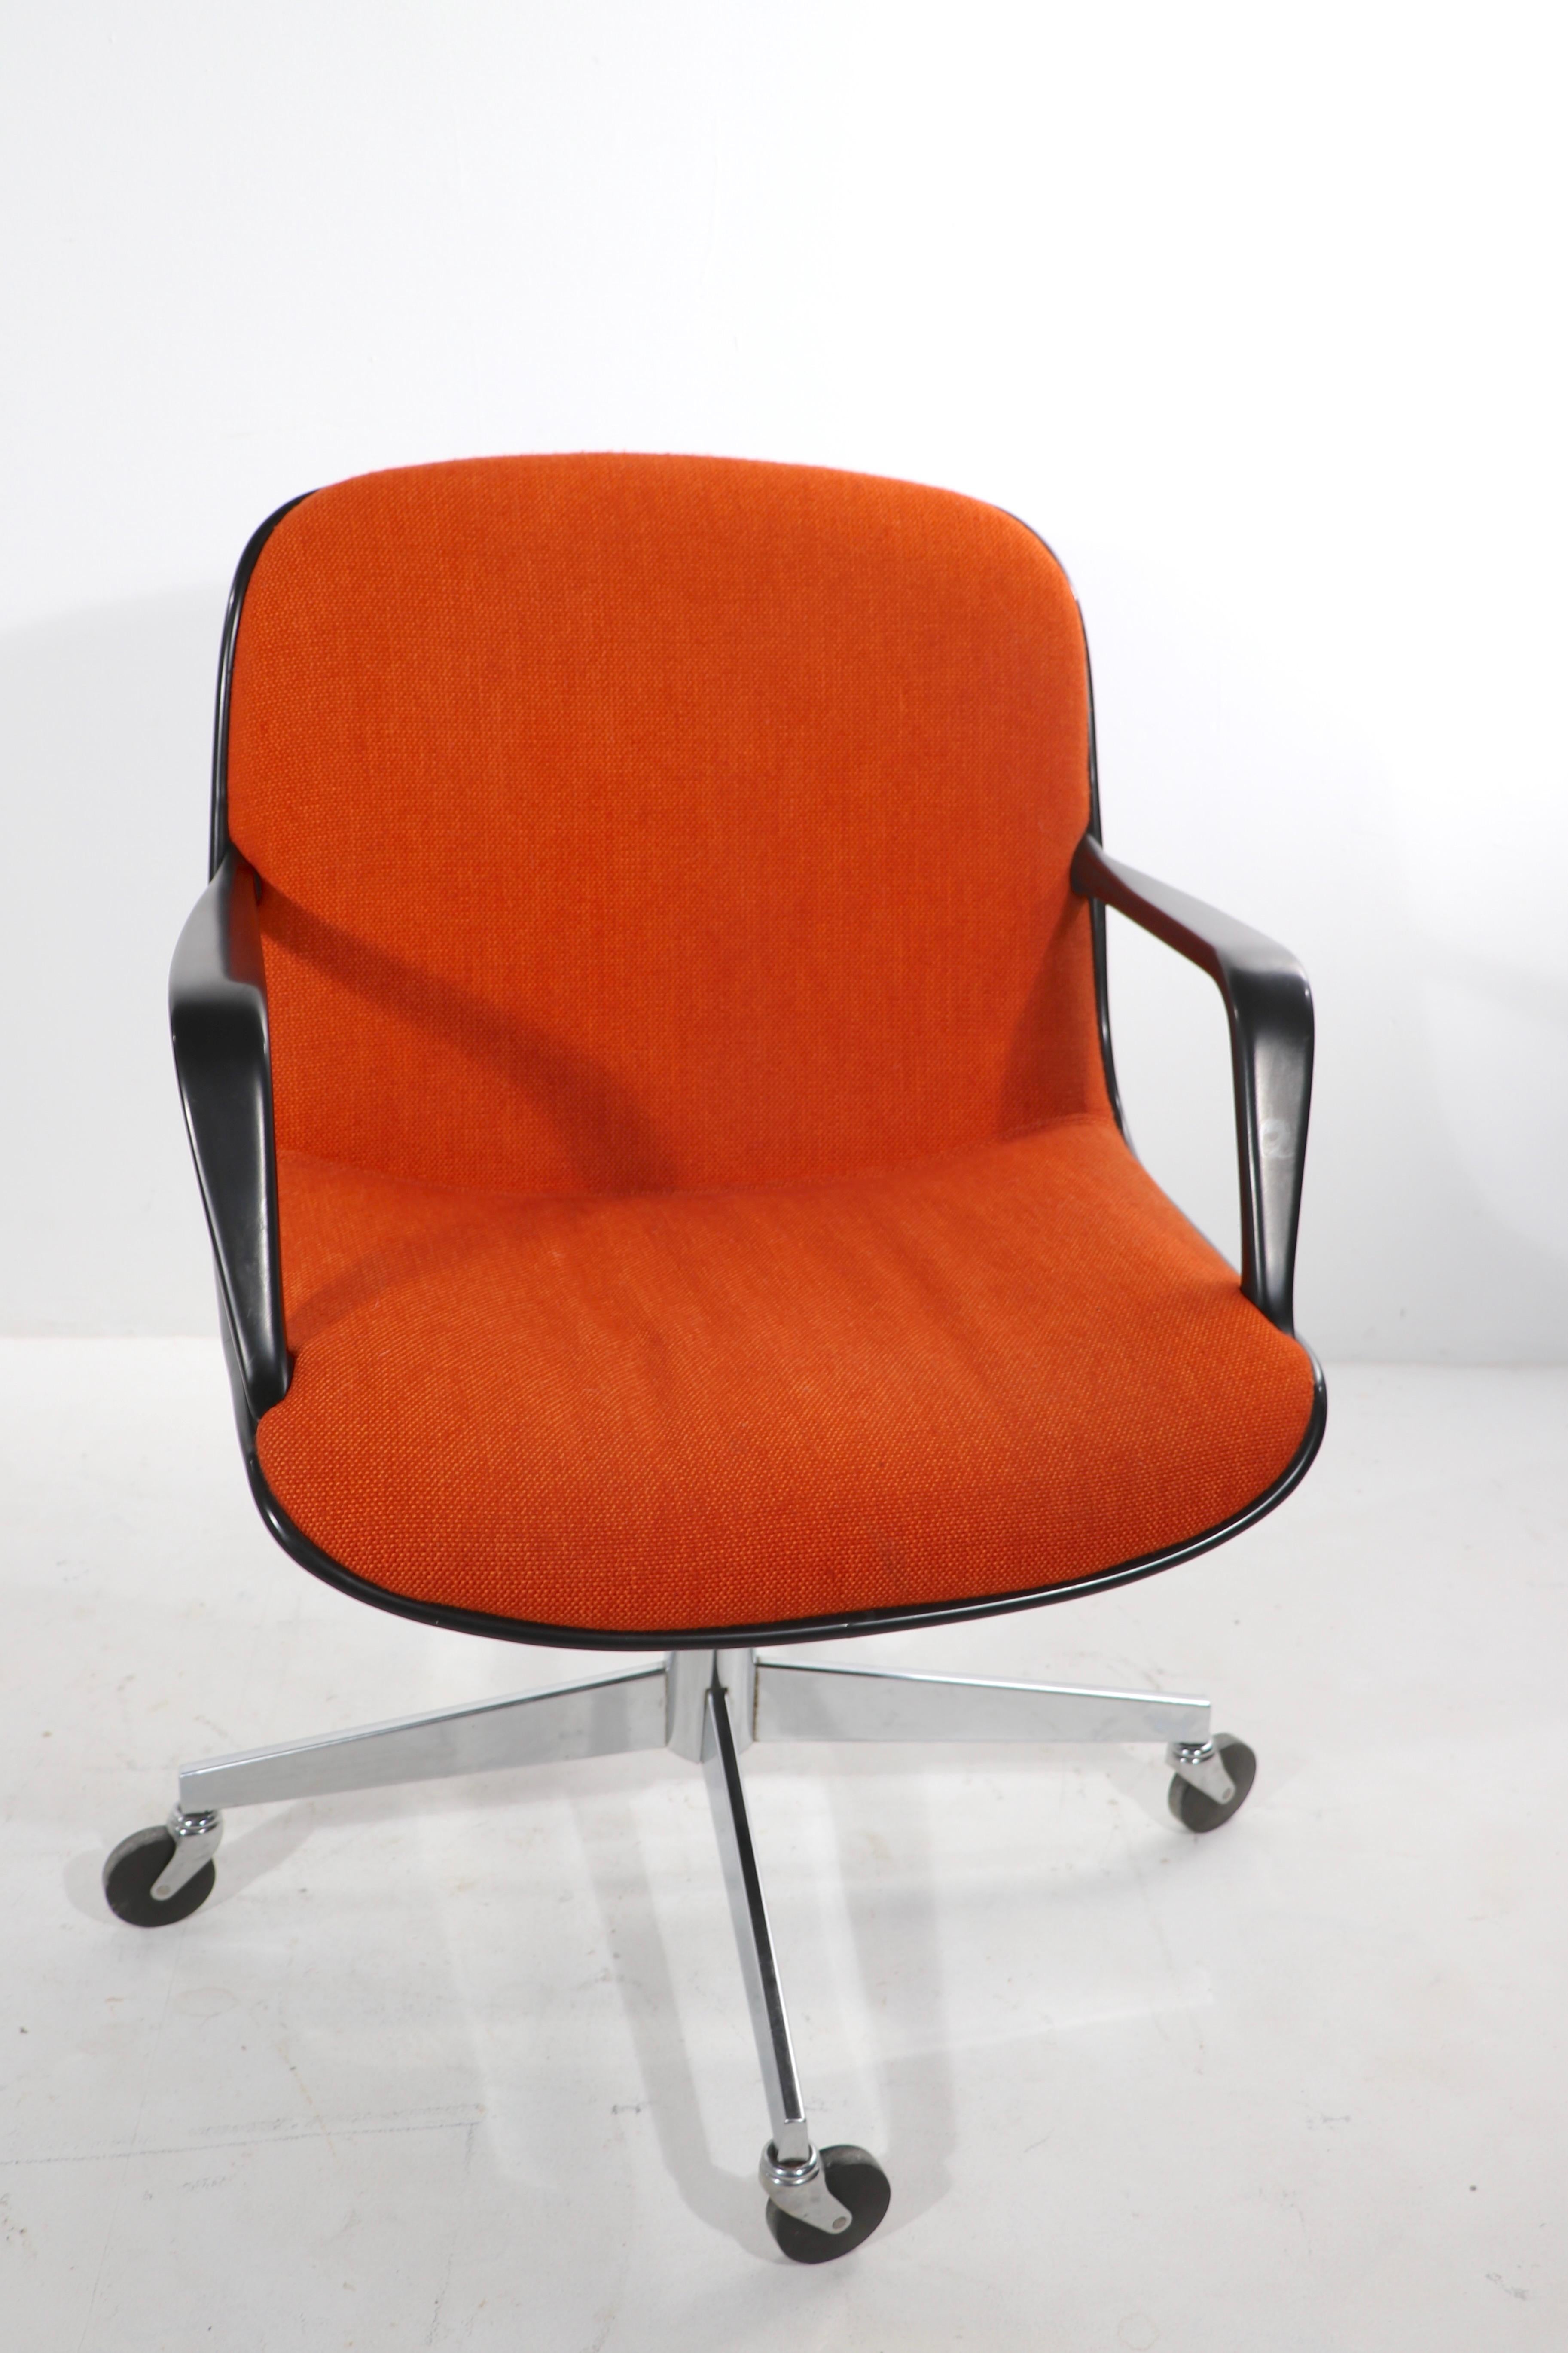 Exceptional Steelcase swivel, tilt, office or desk chair (s) having classic orange tweed fabric upholstered seats and backs, on dark gray exterior shells, black arms, chrome pedestal, and legs, with wheel caster feet. These chairs are not only